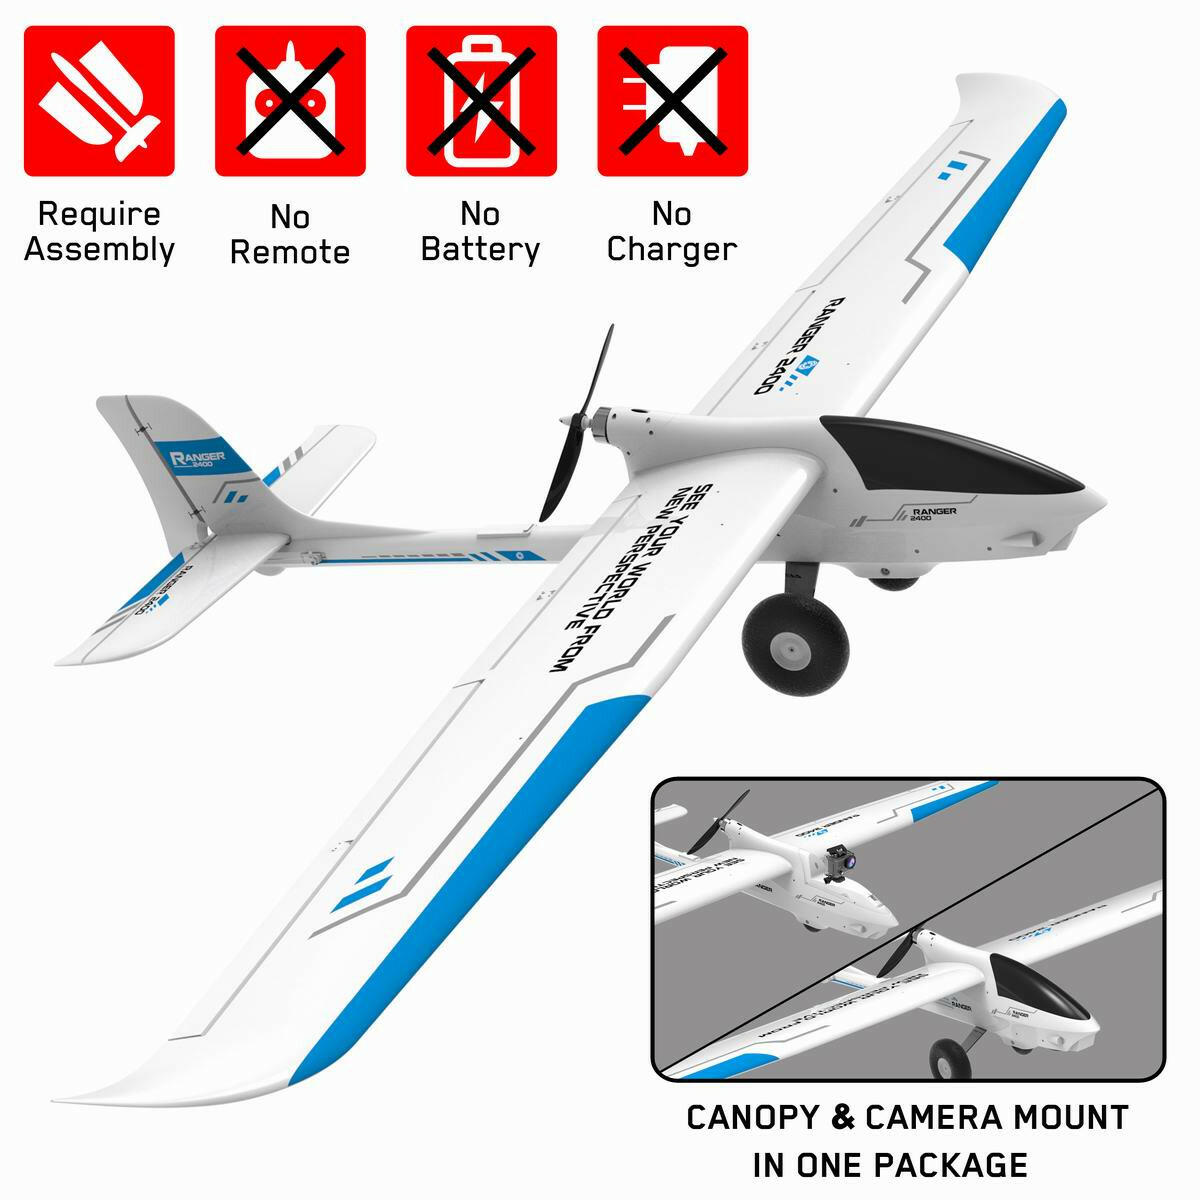 VOLANTEXRC Ranger 2400 5 Channel FPV Airplane with 2.4 Meter Wingspan and Multiple Camera Mounting Platform (757-9) PNP.